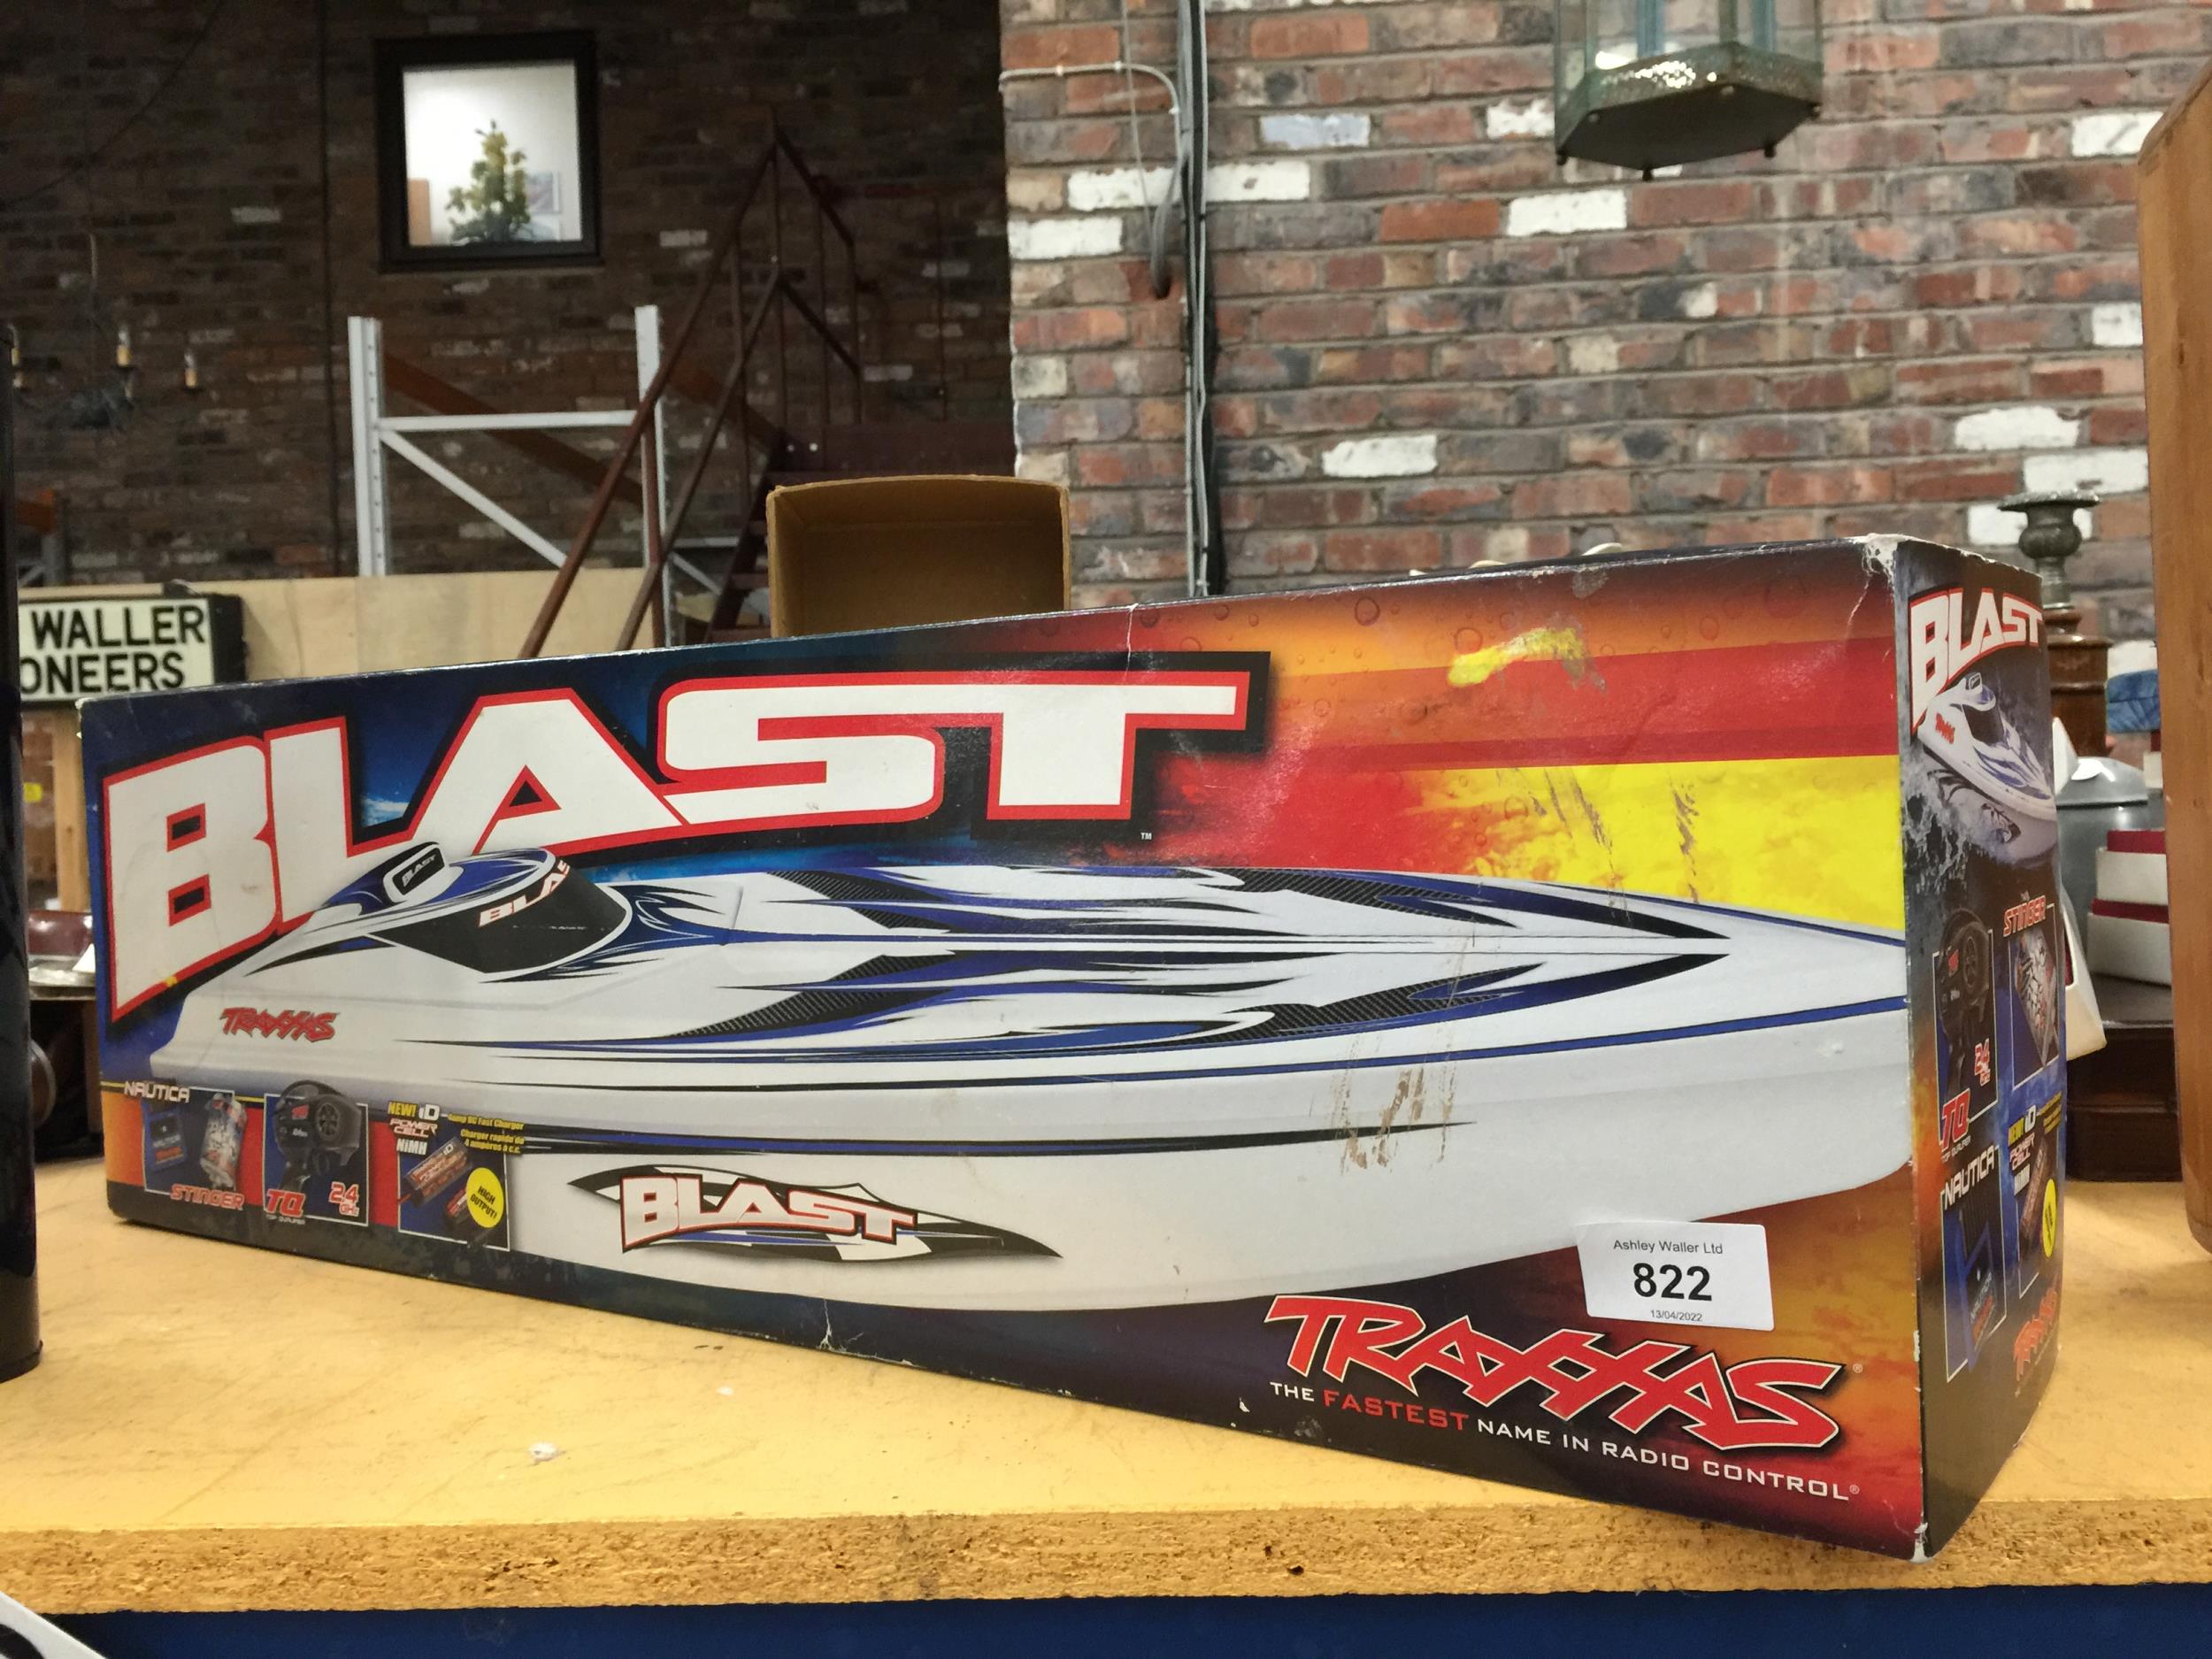 A BOXED TRAXXAS BLAST SPEED BOAT